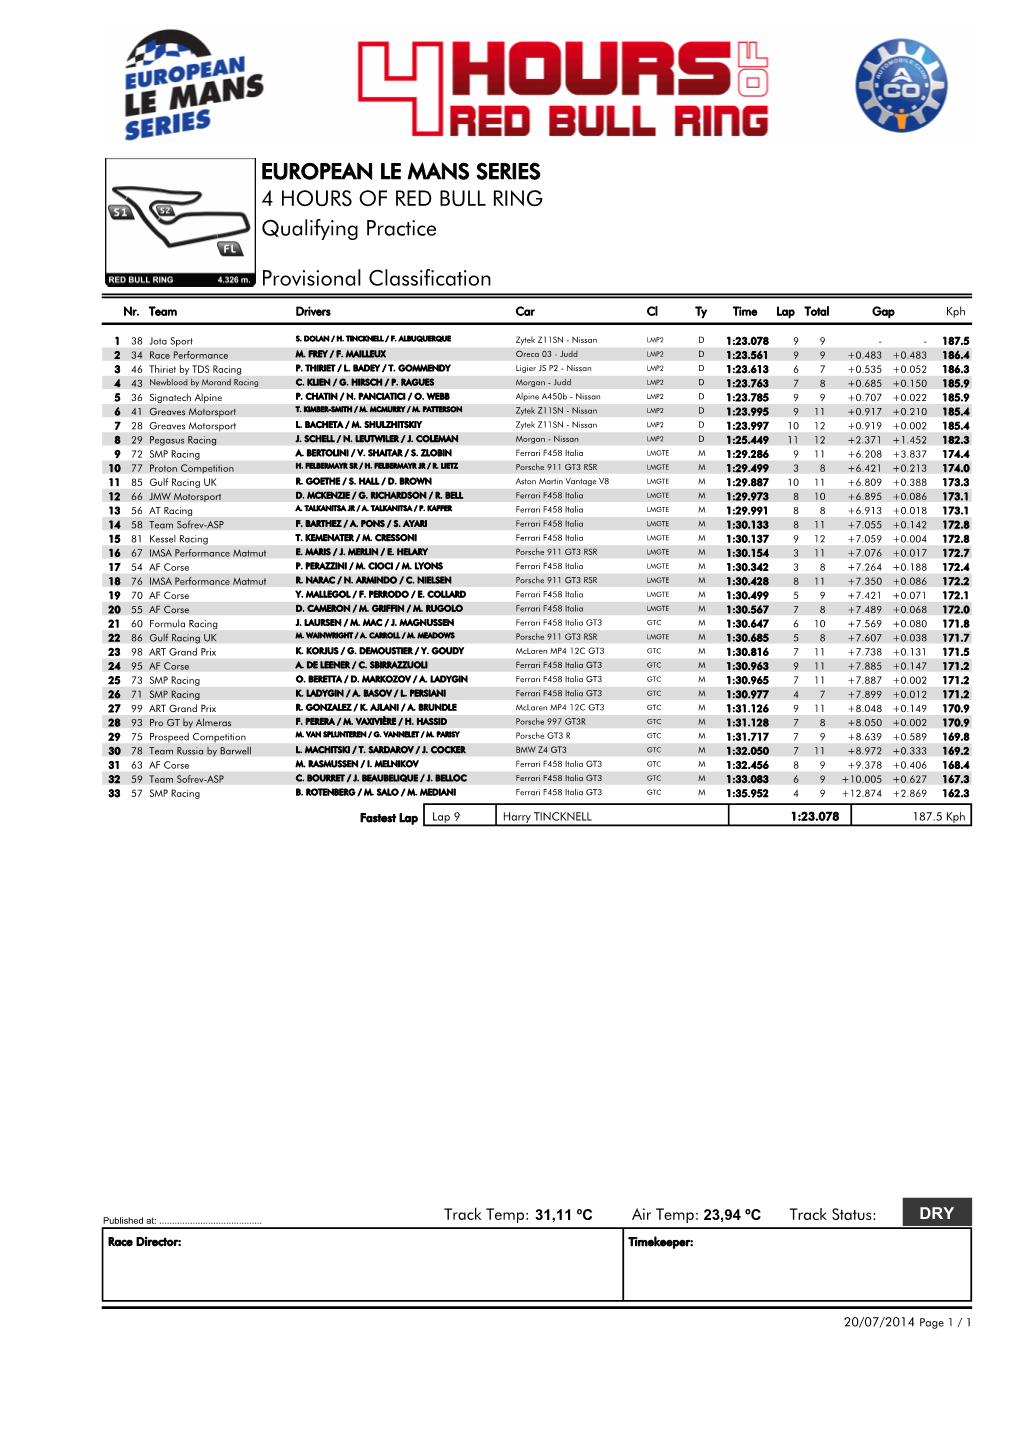 EUROPEAN LE MANS SERIES 4 HOURS of RED BULL RING Qualifying Practice